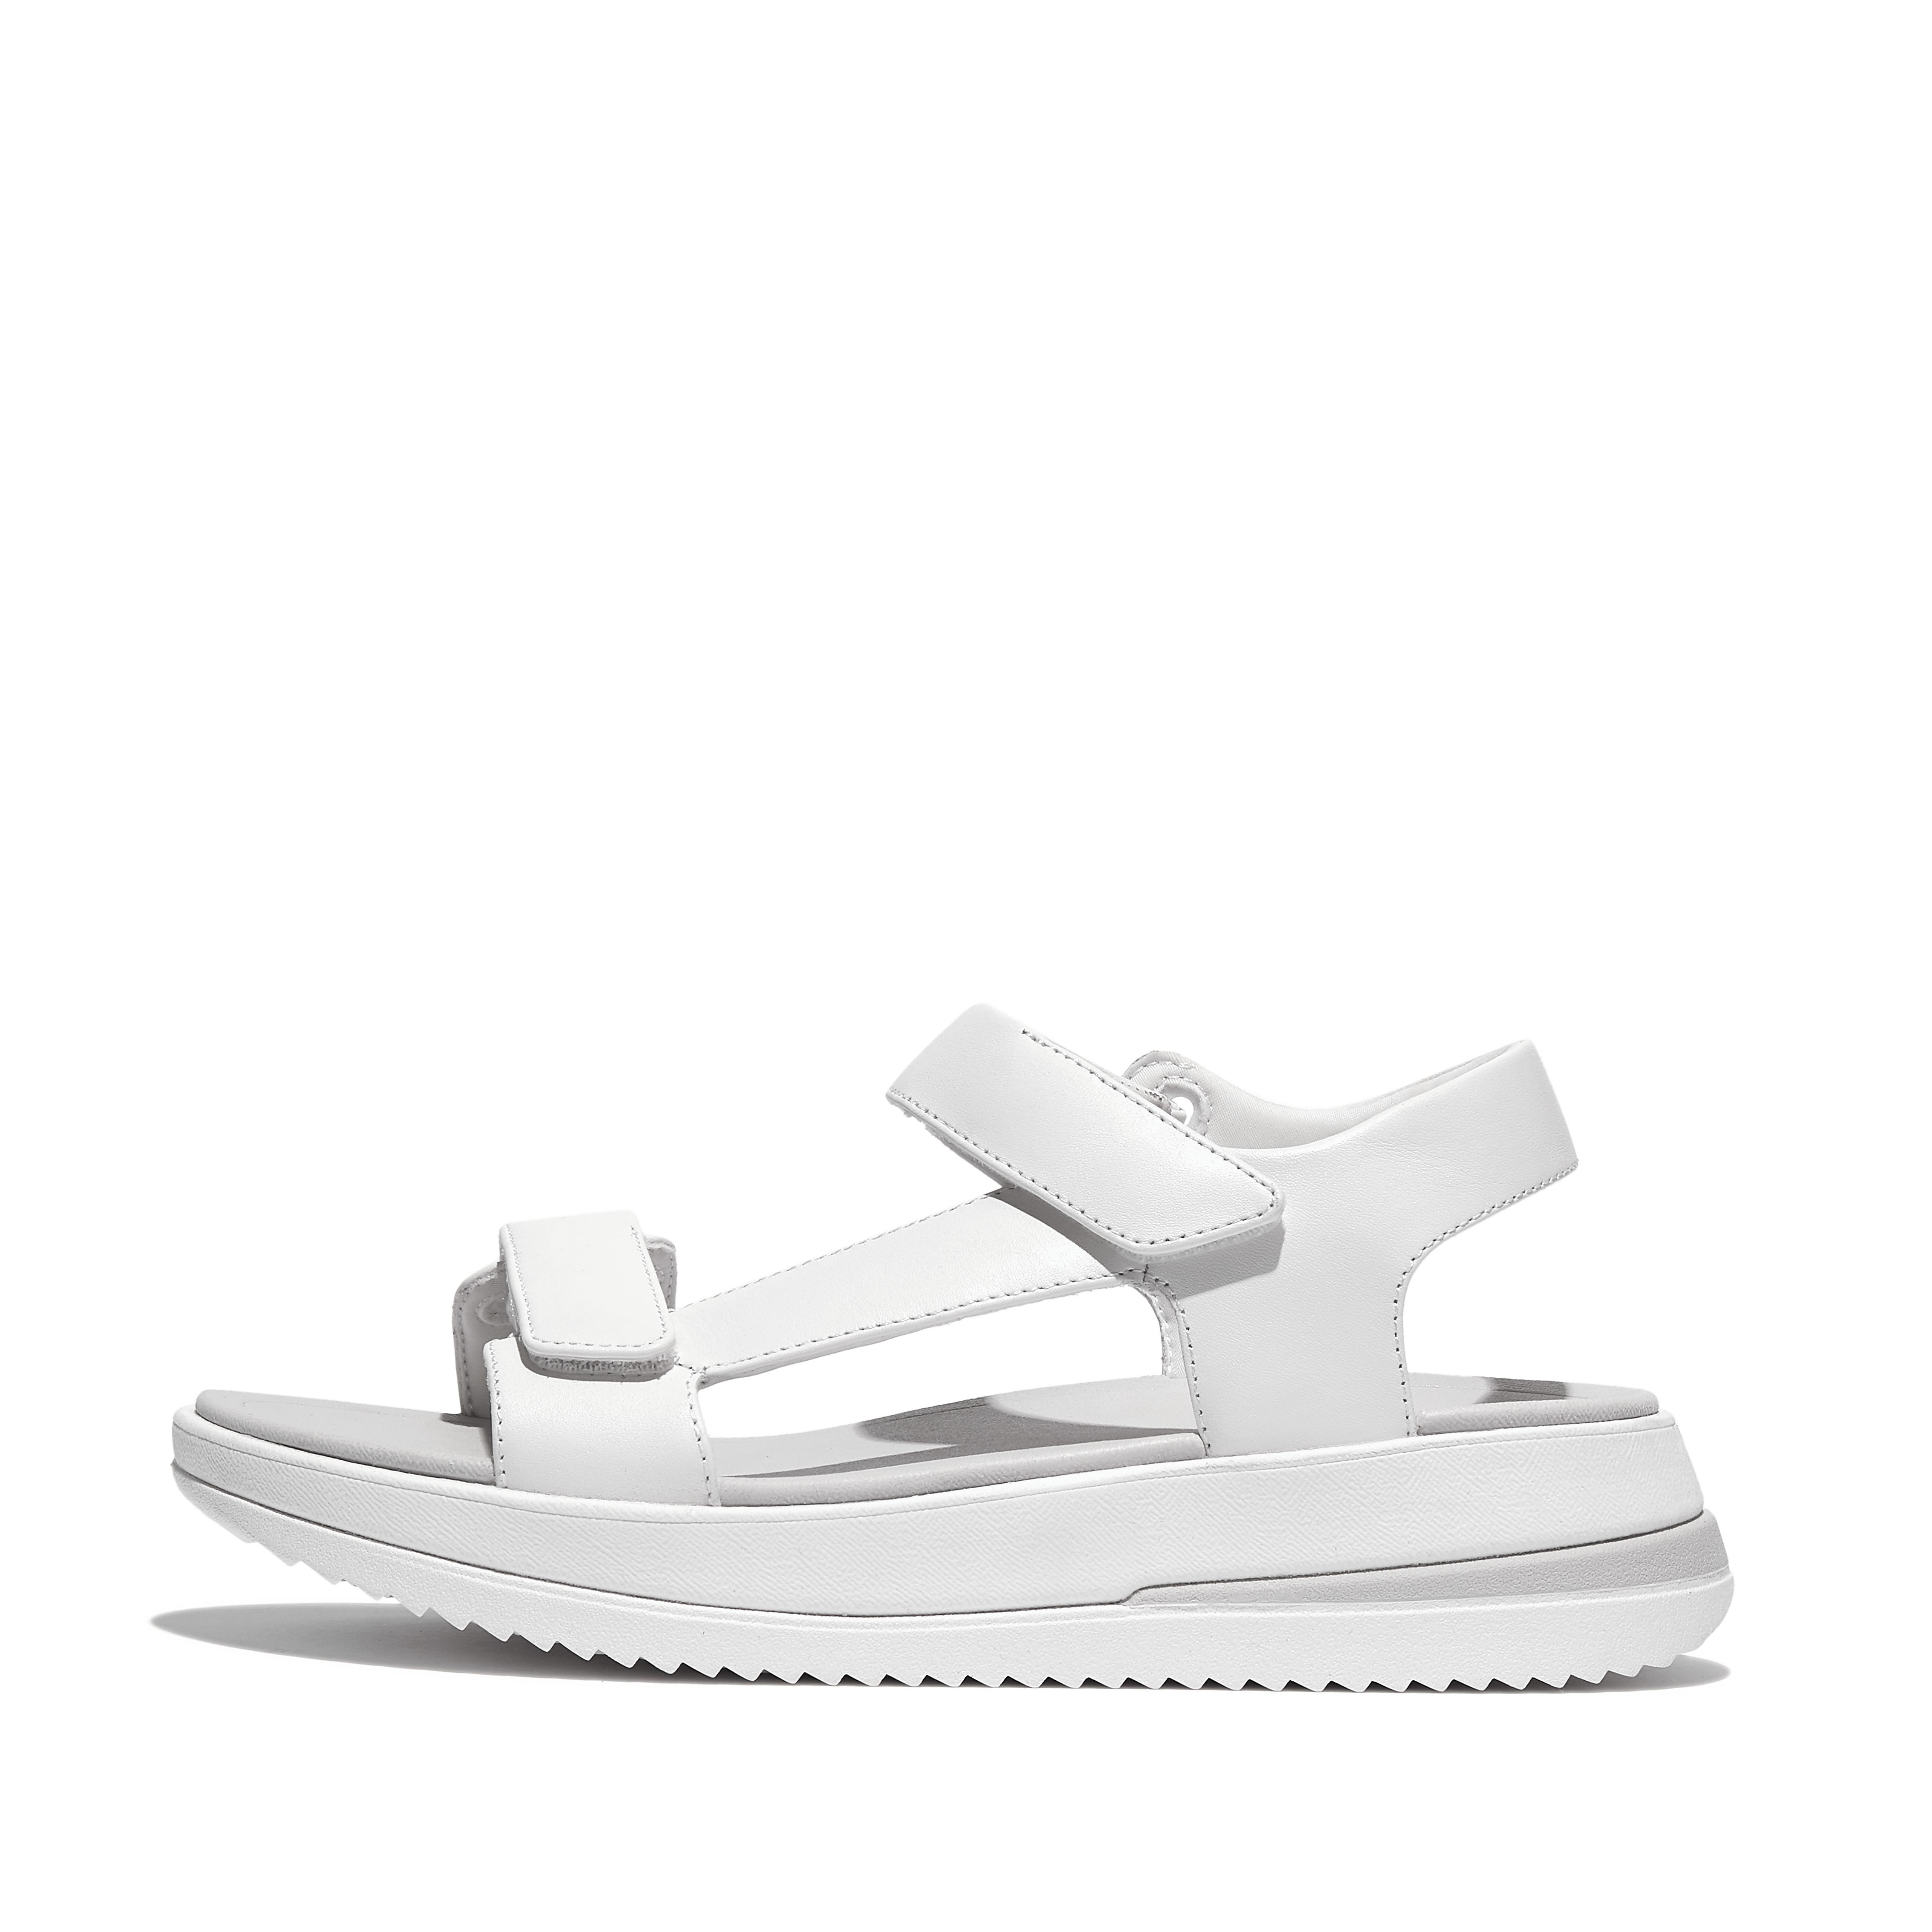 Fitflop Adjustable Leather Back-Strap Sandals,Urban White